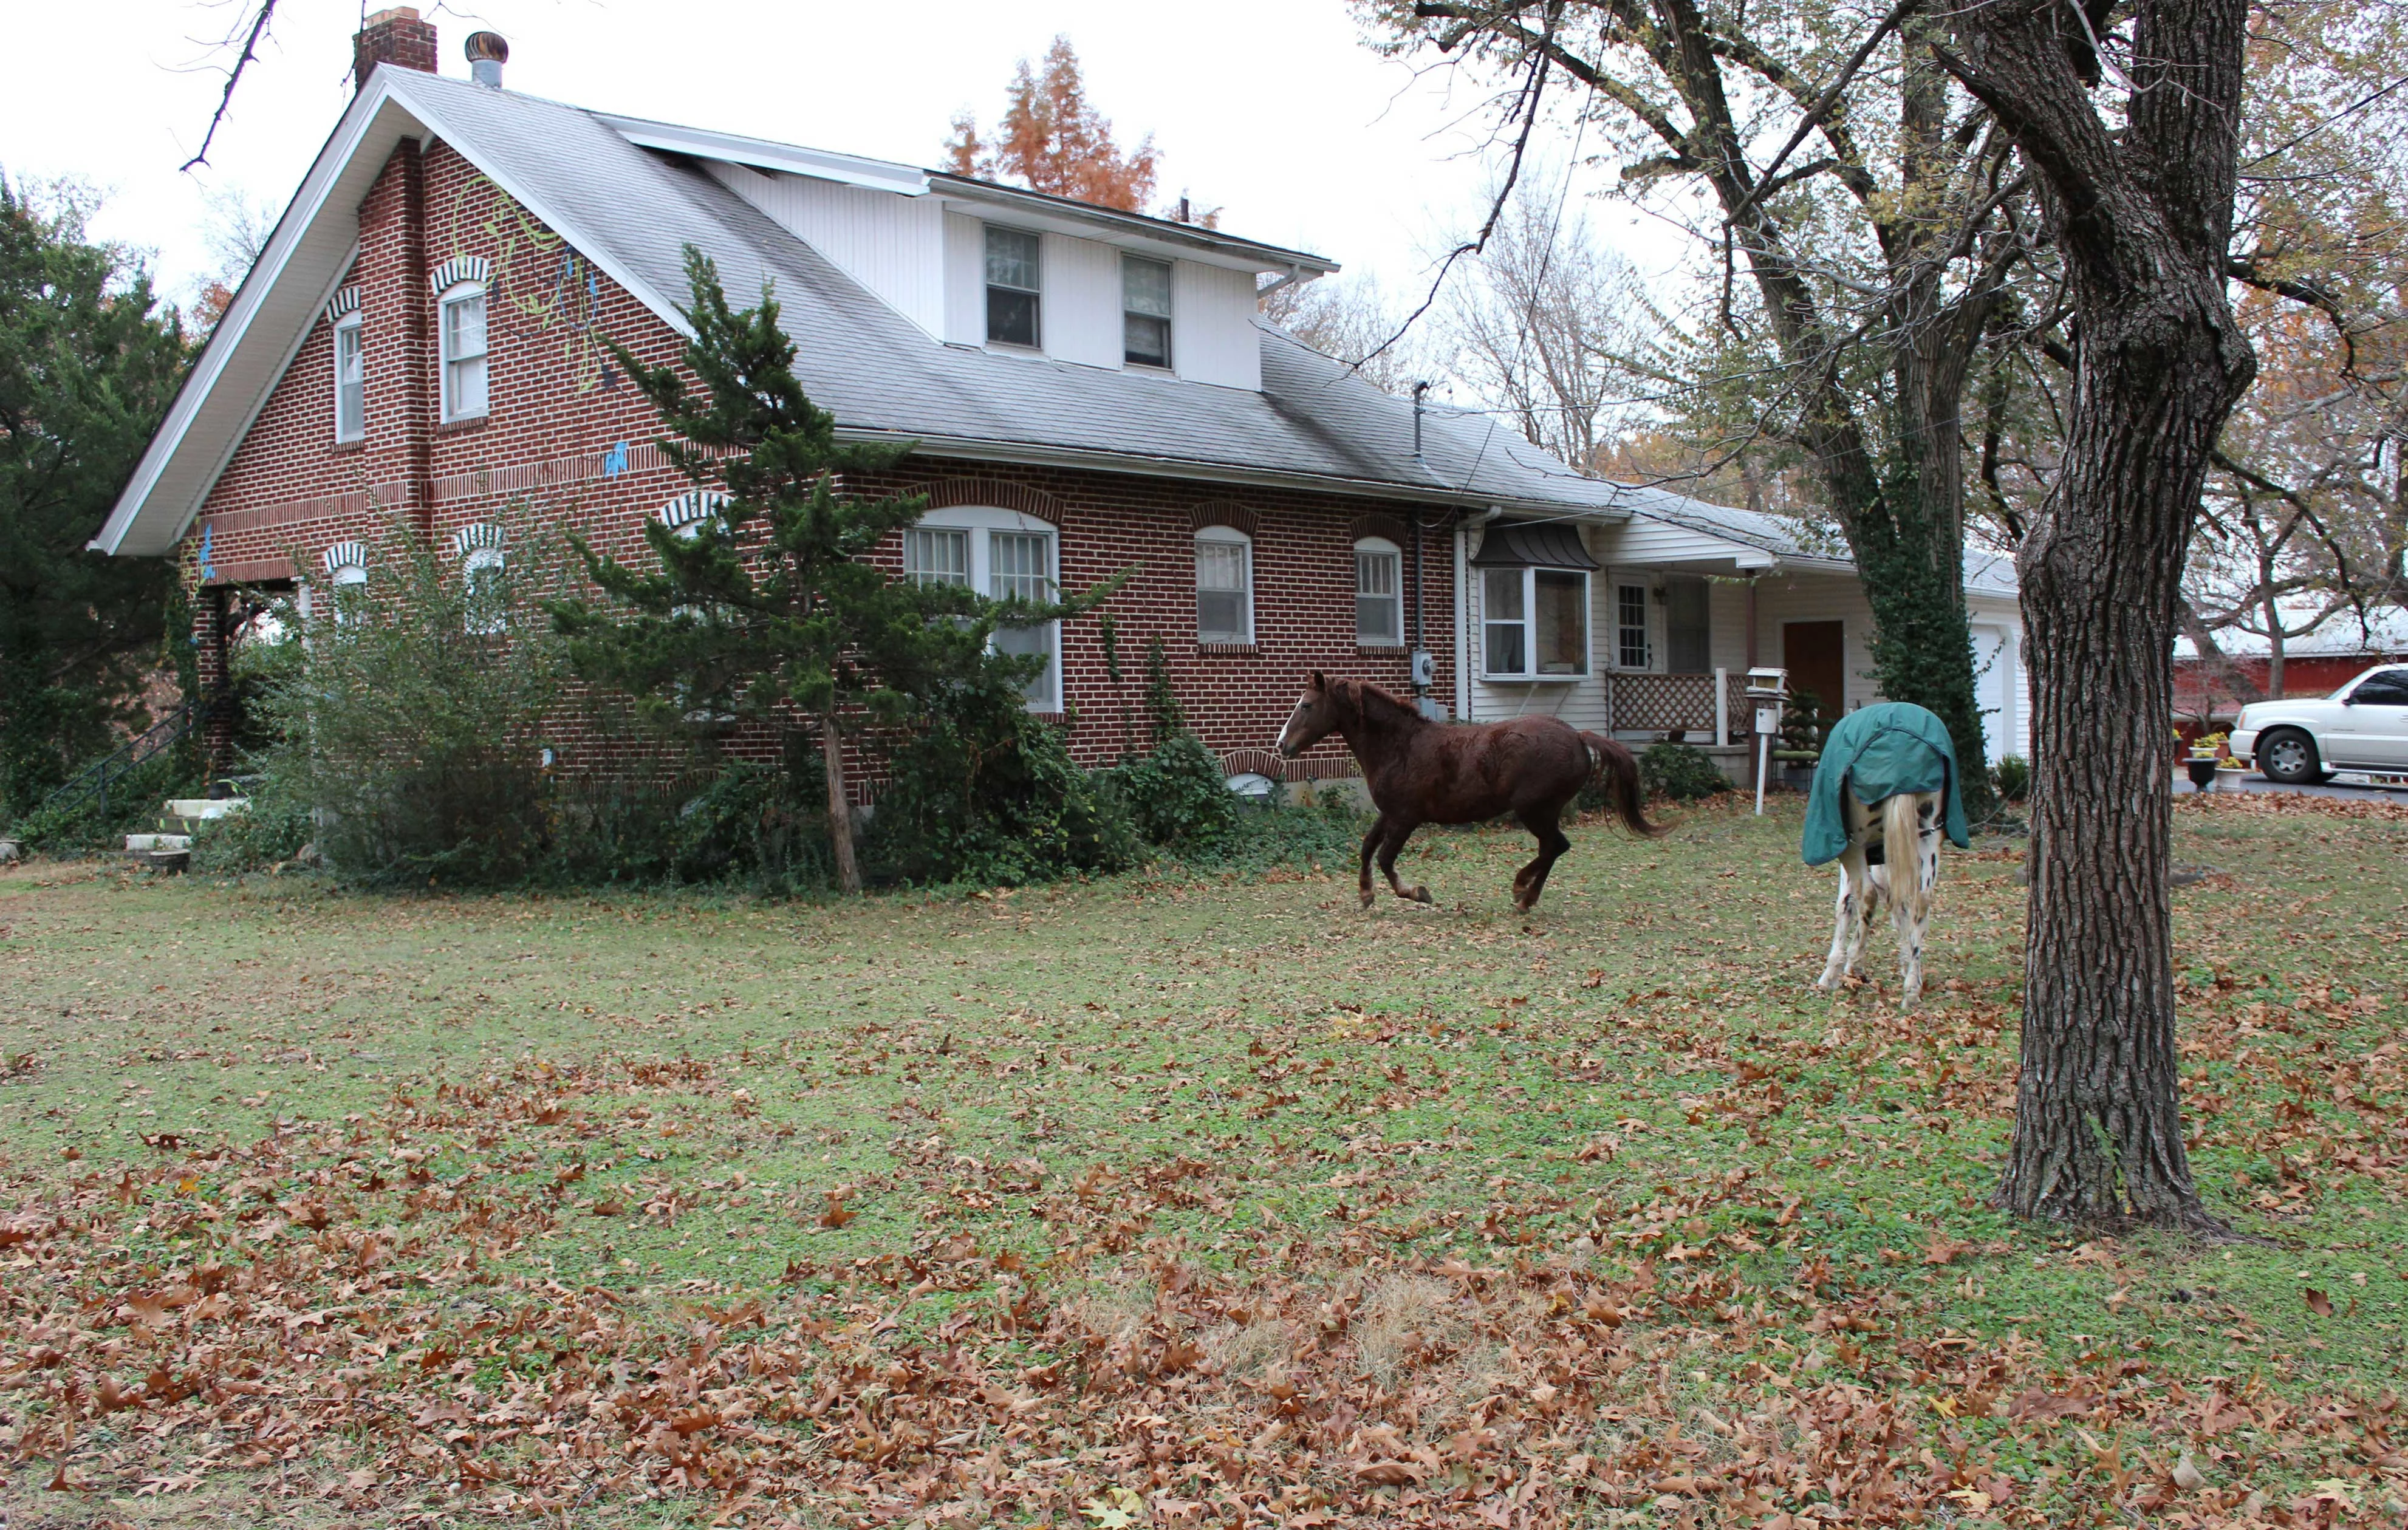 cf horses in front yard hh 1226